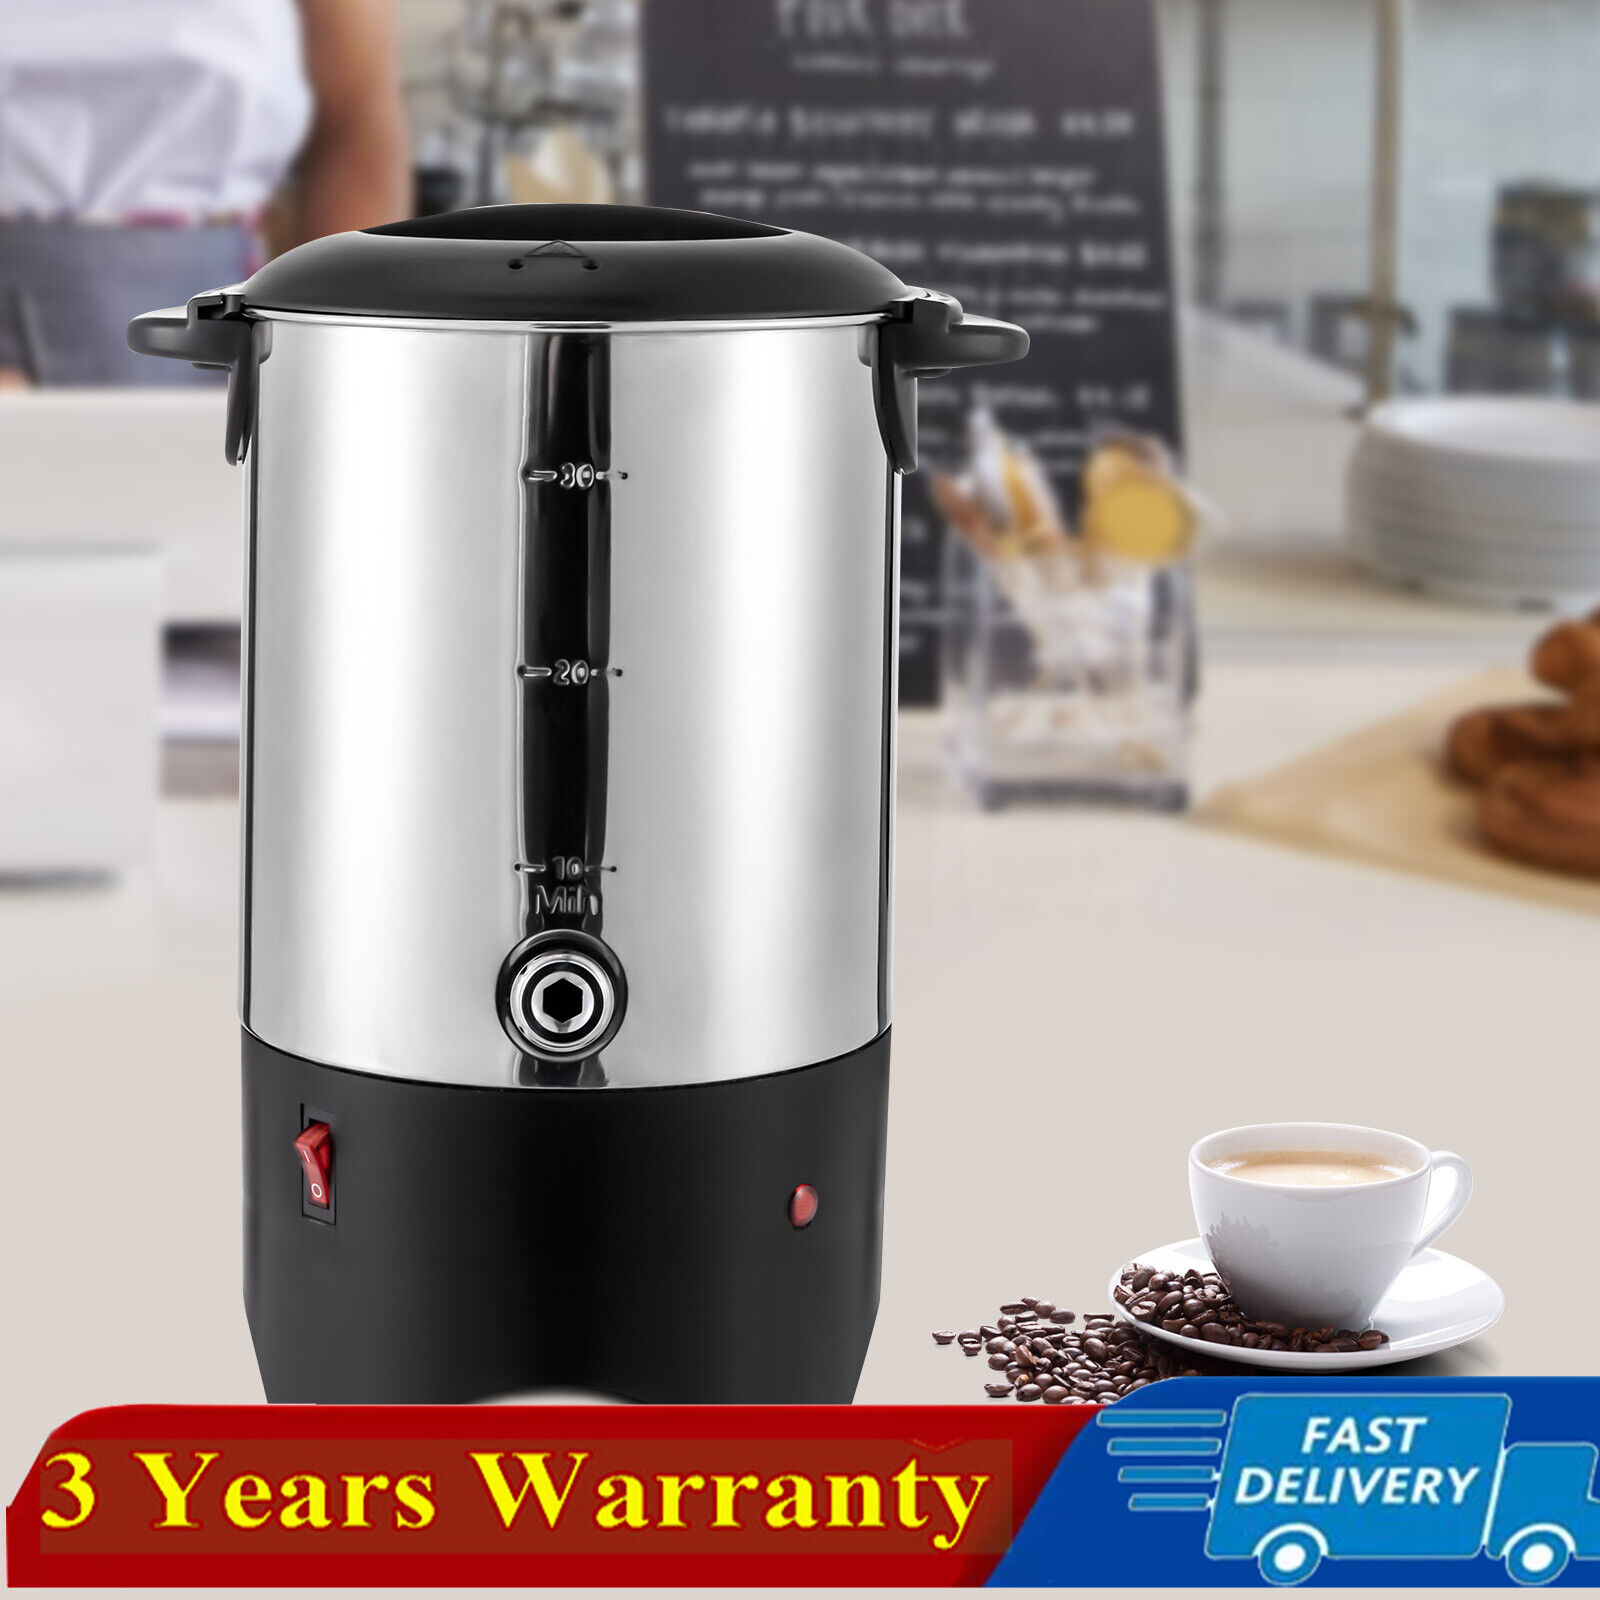 Modern Coffee Percolator 30 Cup Commercial Large Capacity Urn 5.2L/175Oz 1000w